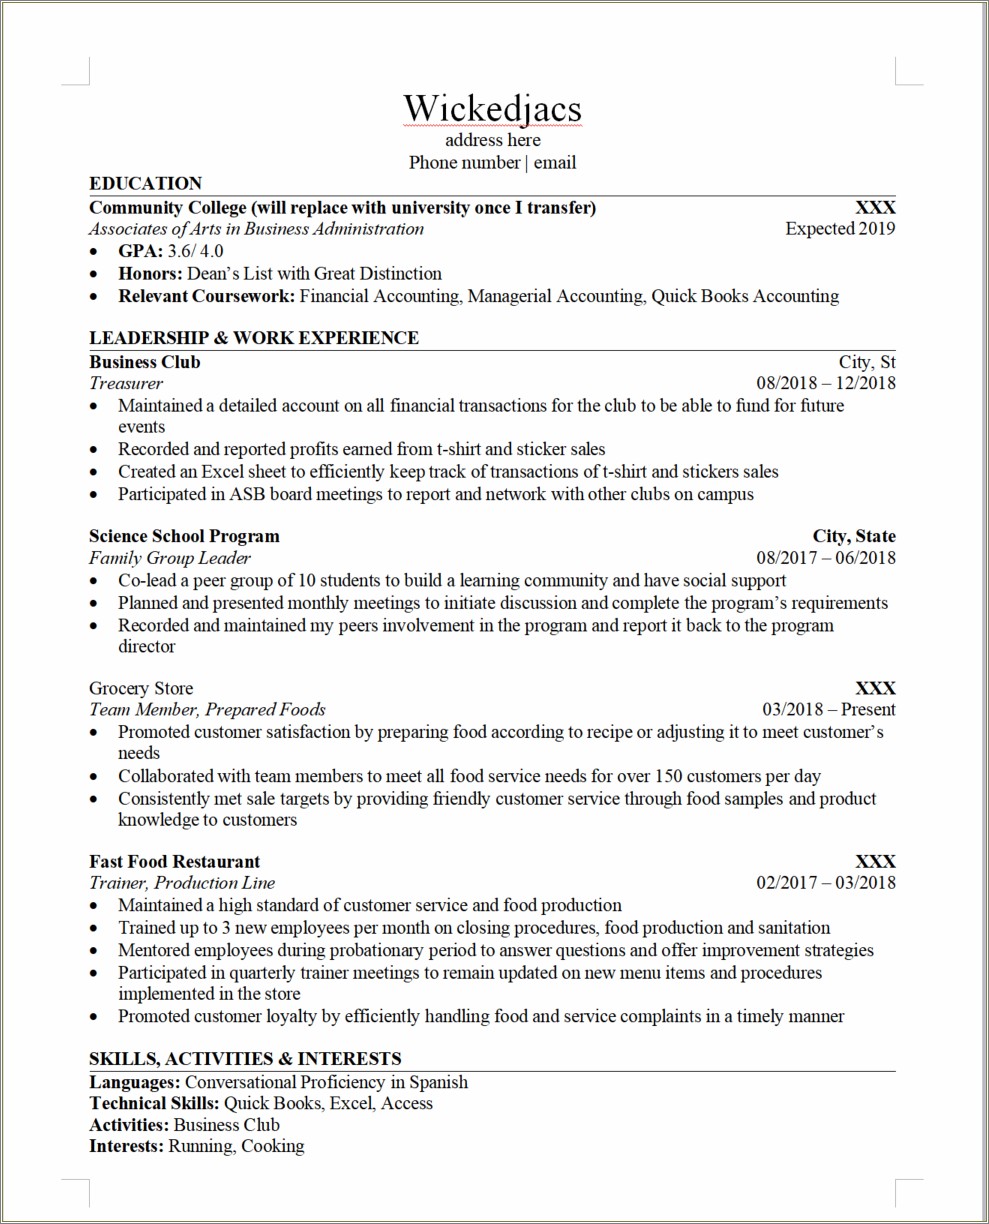 Hobbies That Can Transfer To Skills On Resume